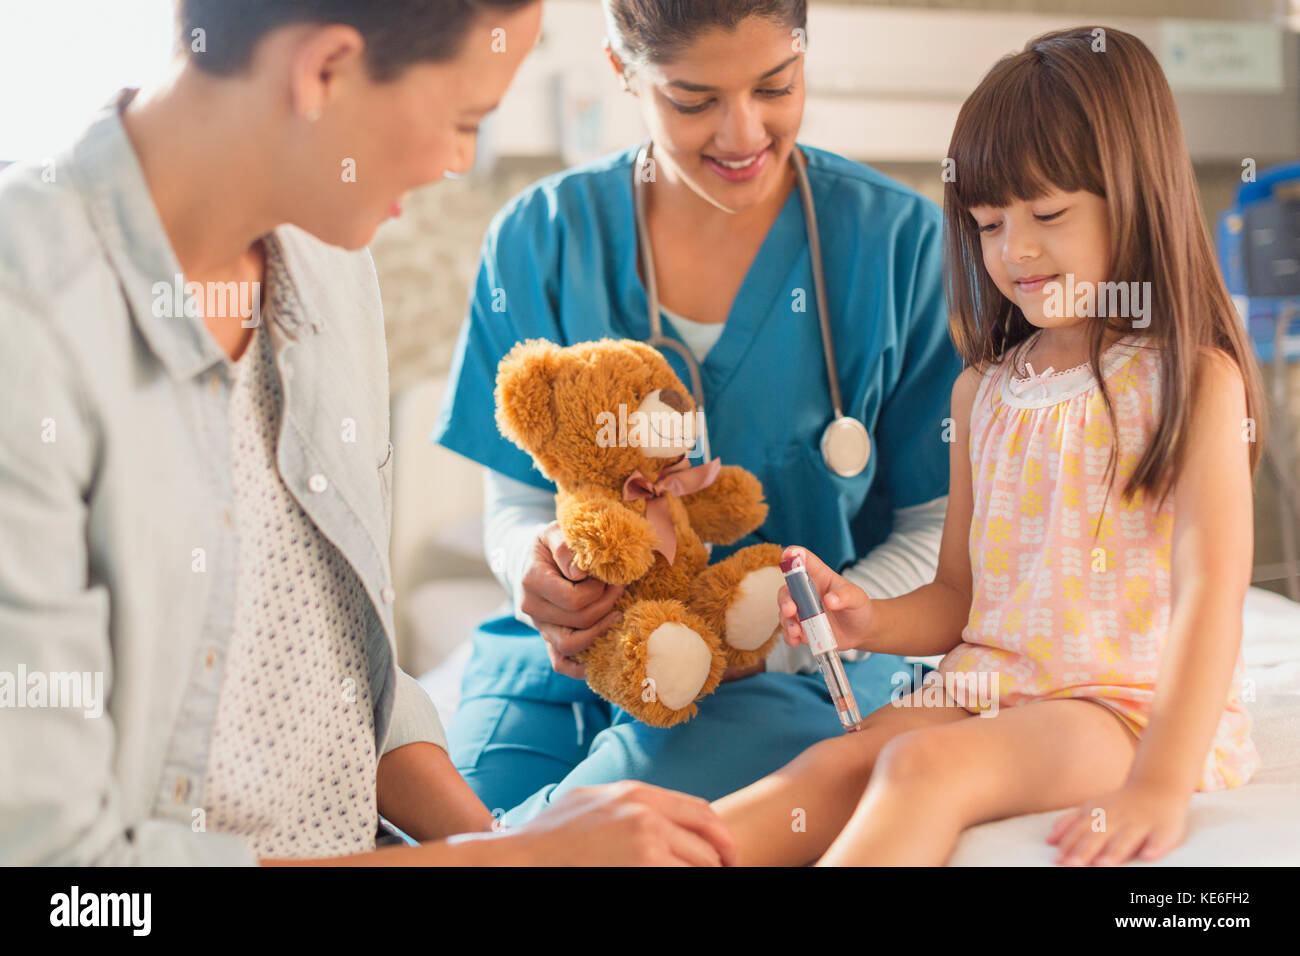 Female nurse with teddy bear watching girl patient using insulin pen in hospital room Stock Photo